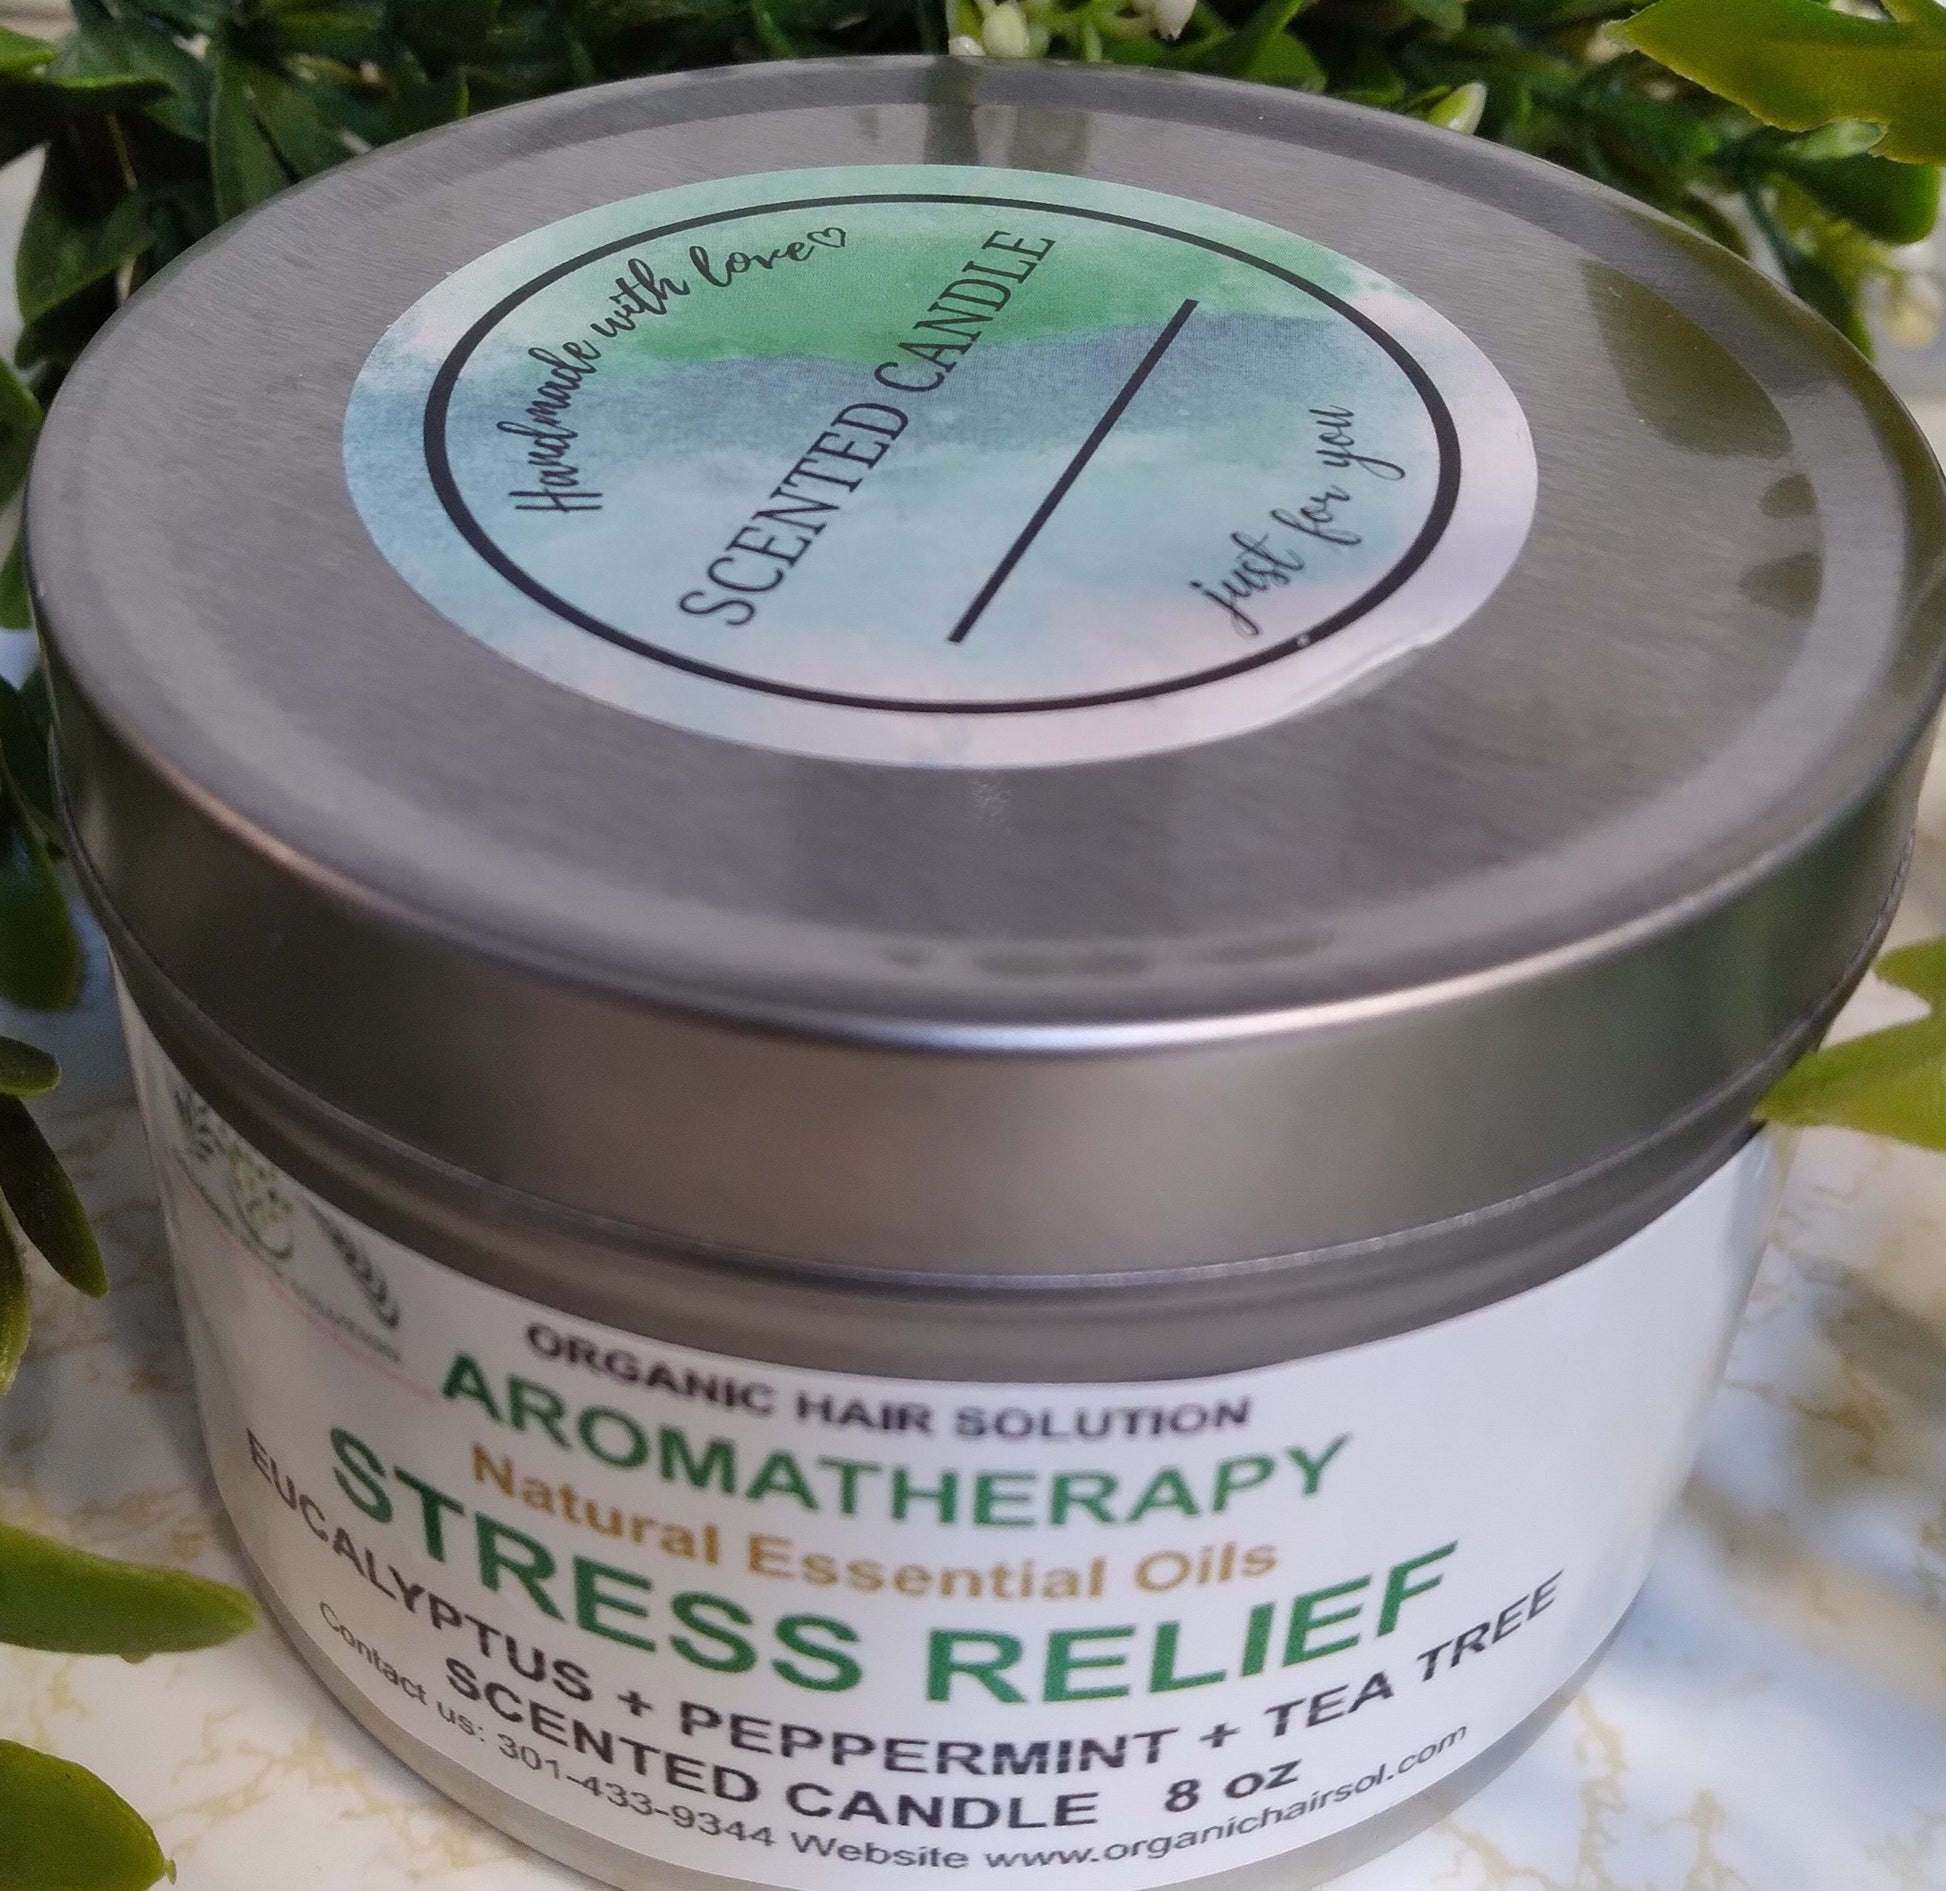 STRESS RELIEF AROMATHERAPY CANDLE-with Eucalyptus-Peppermint & Tea Tree (8 oz) - Organic Hair Solution, LLC